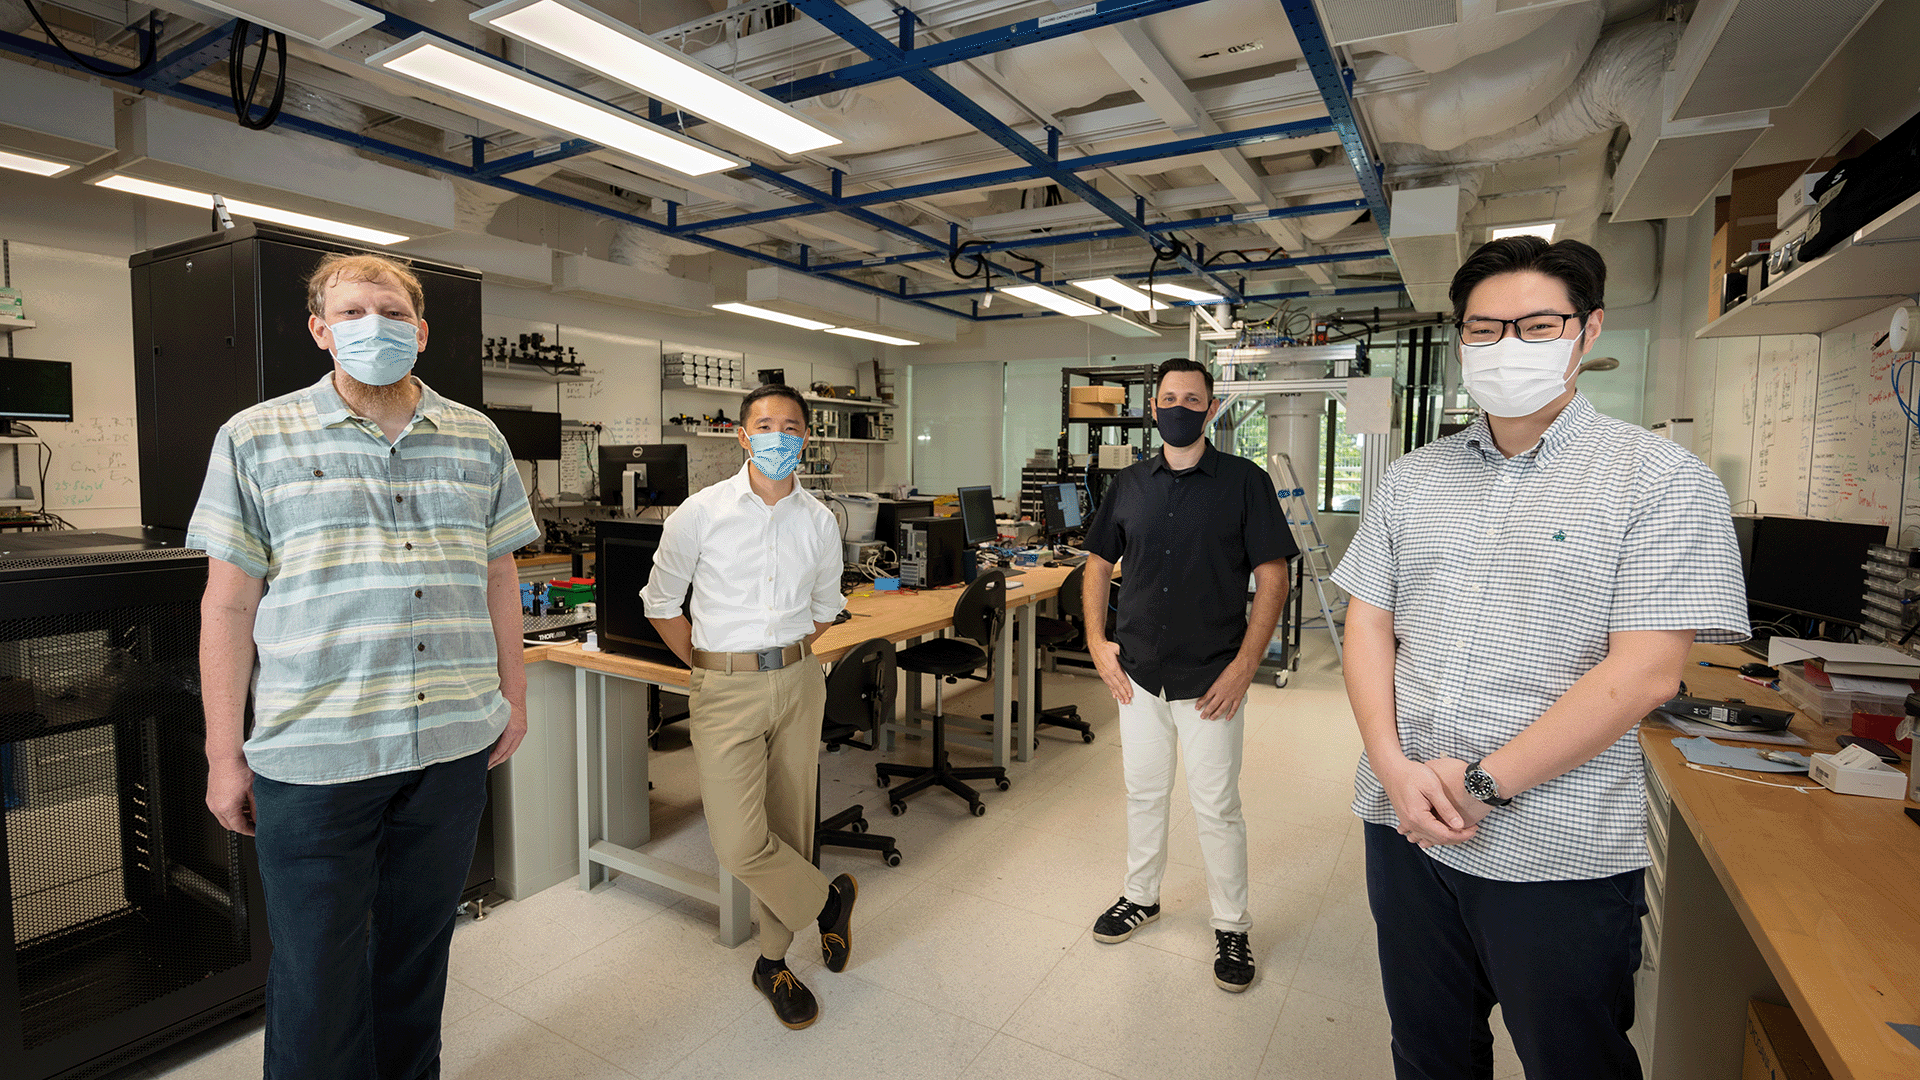 Asst Prof Charles Lim (right) with members of the National Quantum-Safe Network (NQSN) team at the Centre for Quantum Technologies